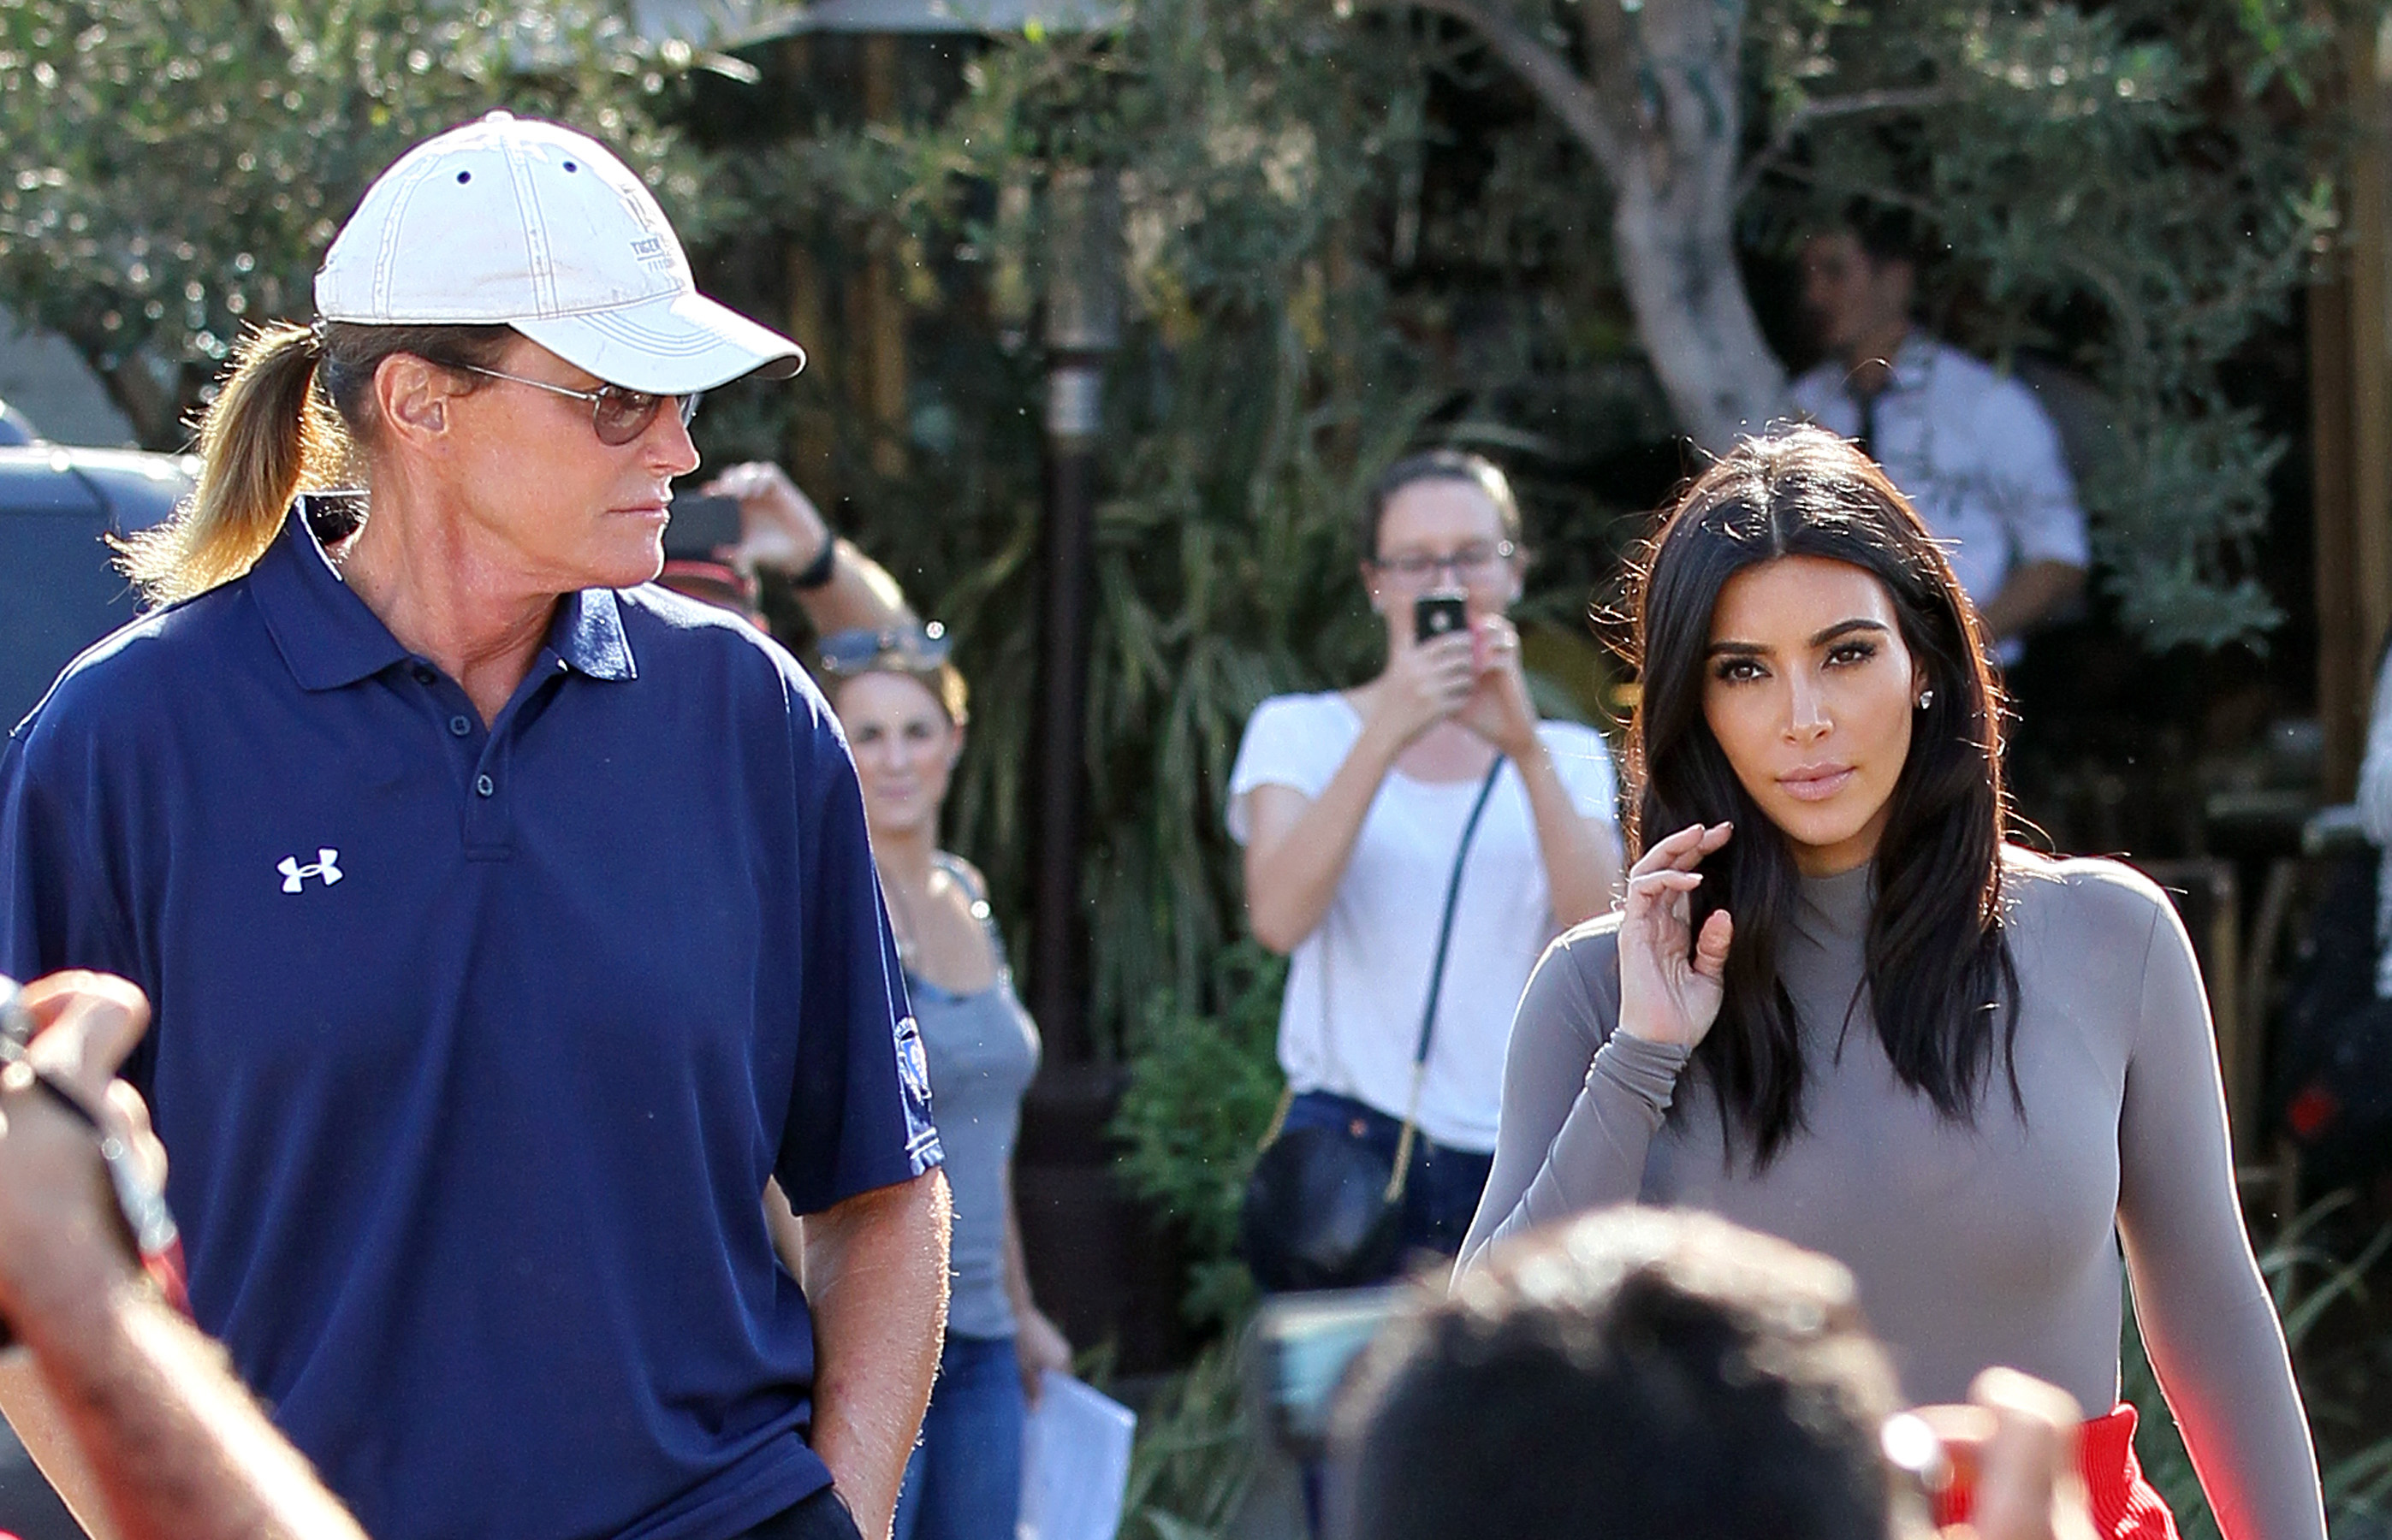 Kim Kardashian and Bruce Jenner are seen filming  their reality show on Oct. 20, 2014 in Los Angeles.